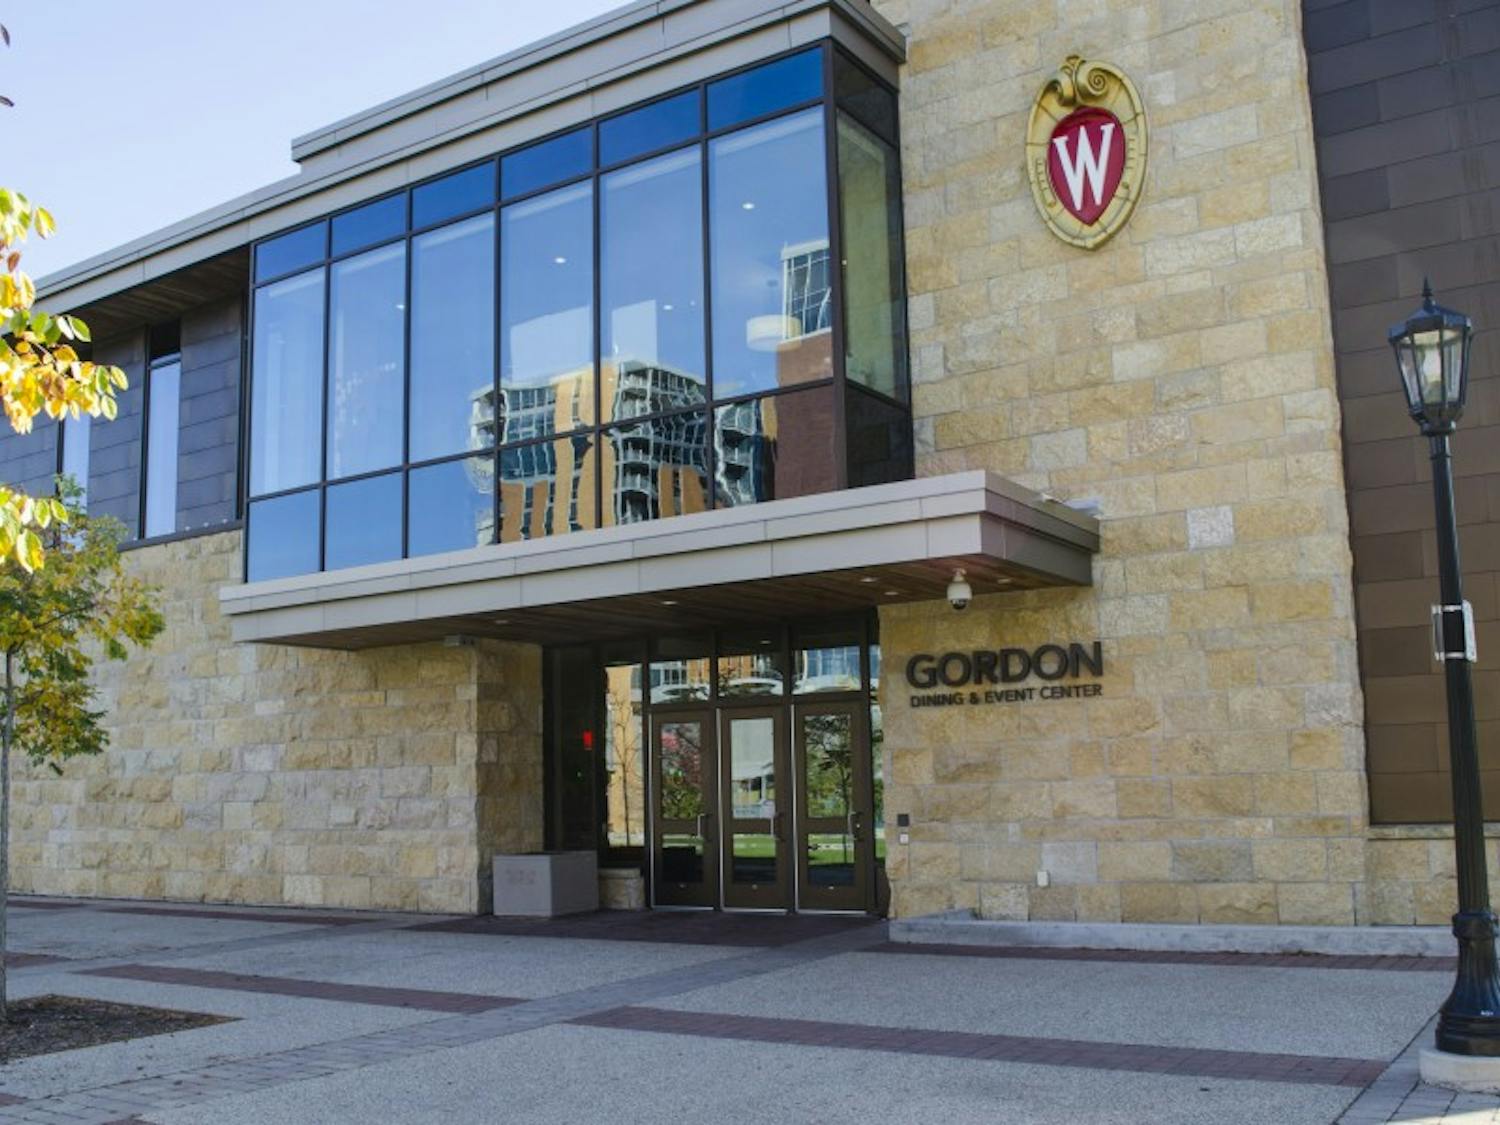 The average minimum cost for a dining plan in the Big Ten&nbsp;is almost three times the cost of UW-Madison’s lowest tier meal plan.